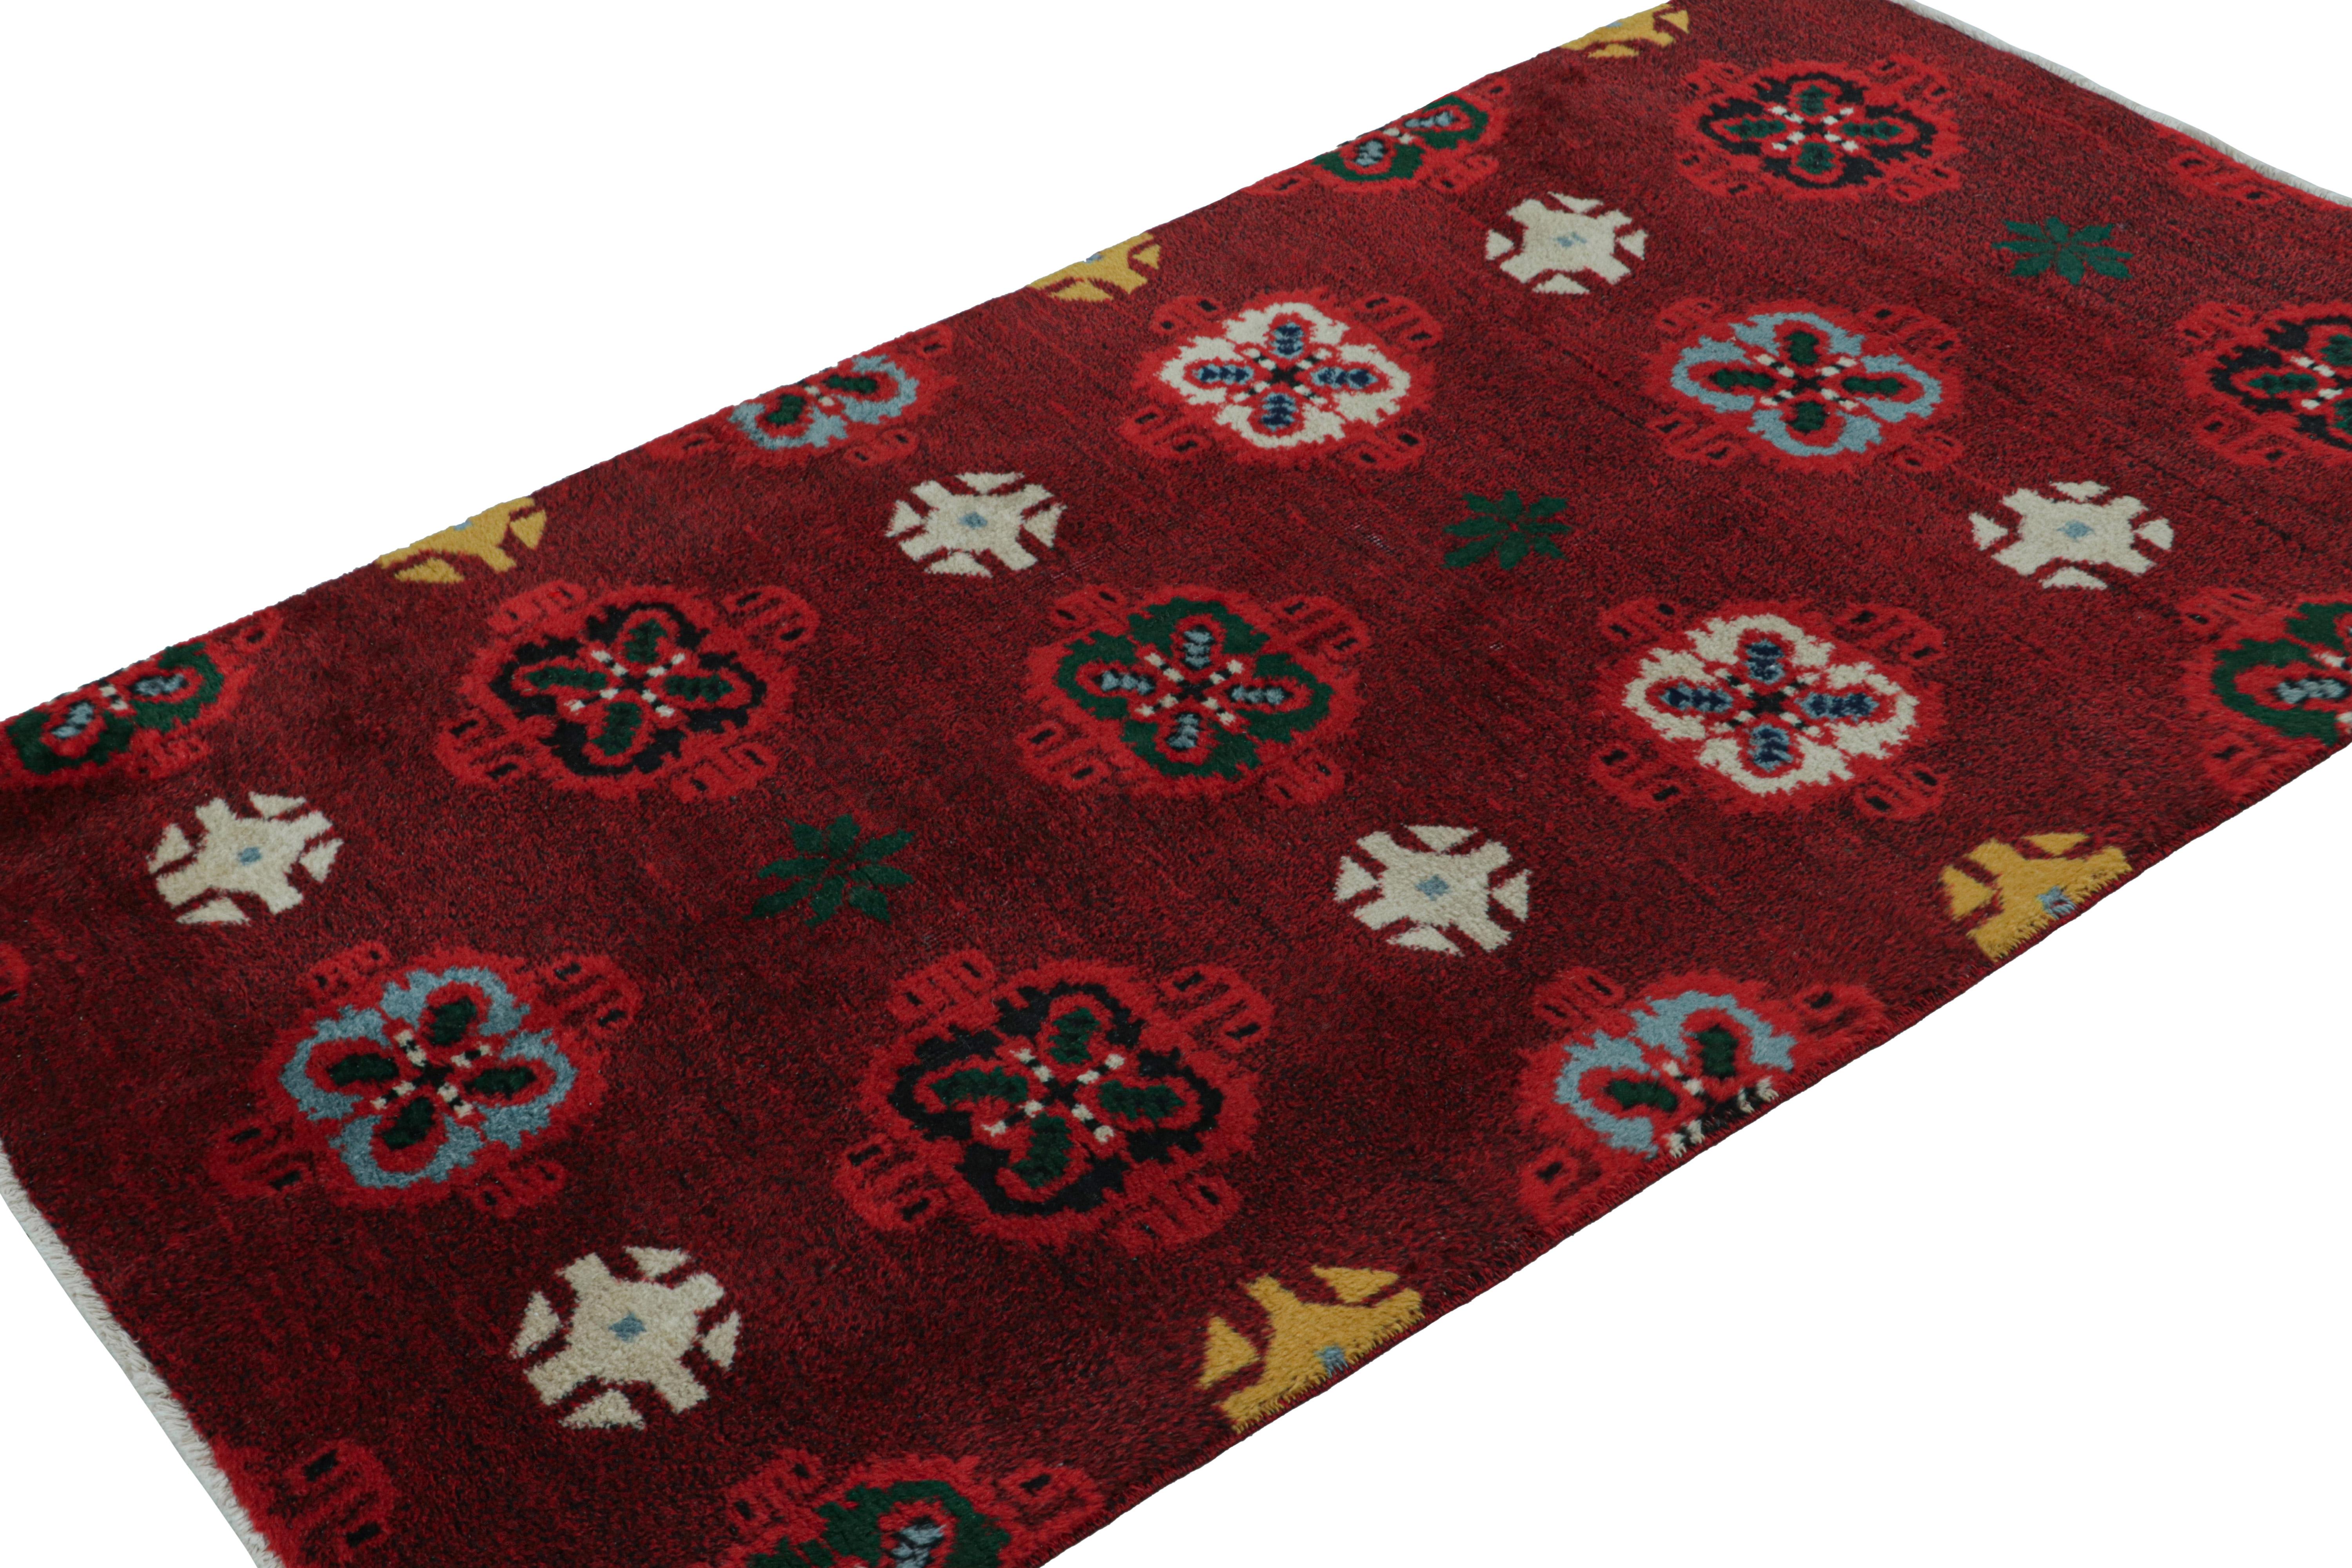 Hand-knotted in wool, circa 1960 - 1970, this 4x6 vintage rug believed to hail from Zeki Muren - latest to join Rug & Kilim’s Mid Century Pasha collection. 

On the Design: 

The rug carries polychromatic geometric patterns on a rich red field. Keen